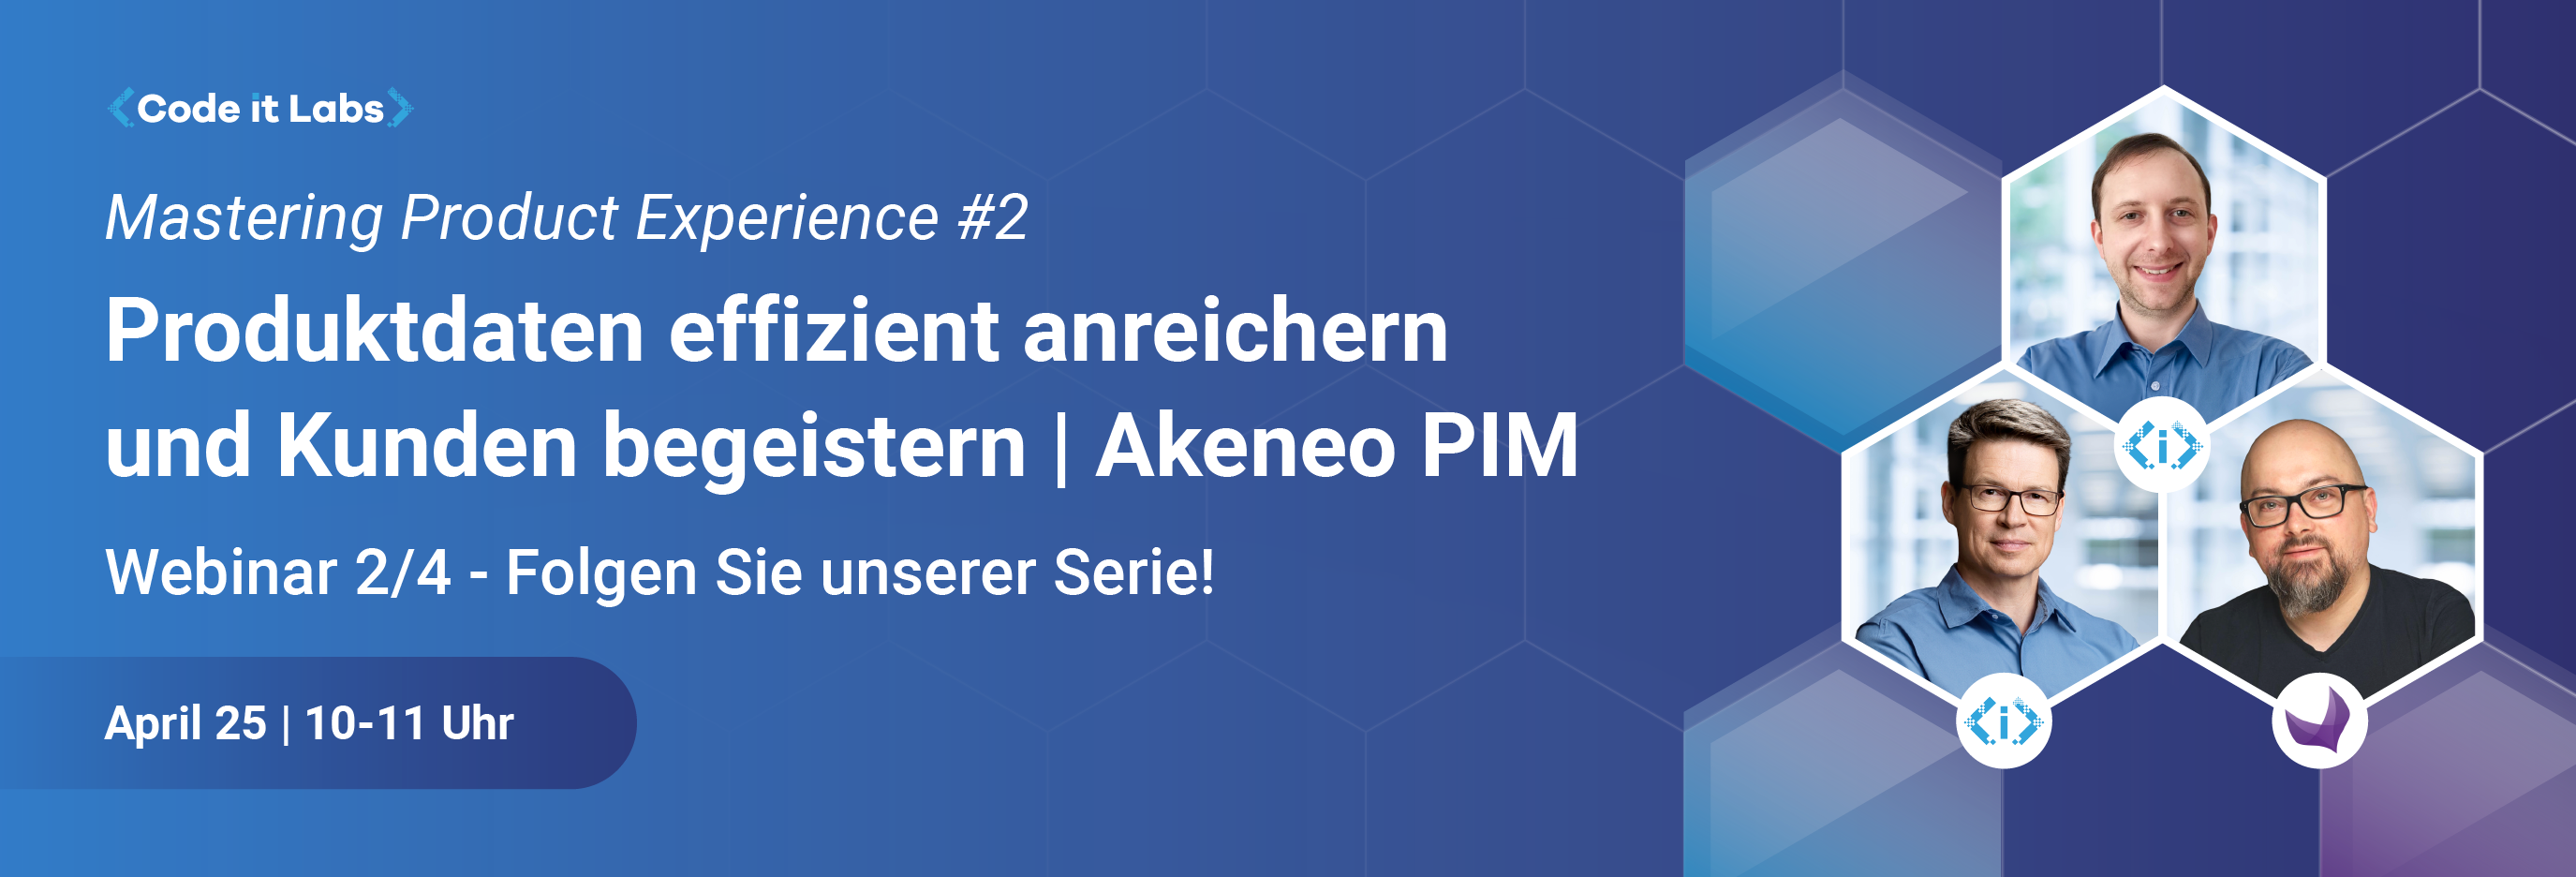 enrich product data with Akeneo PIM